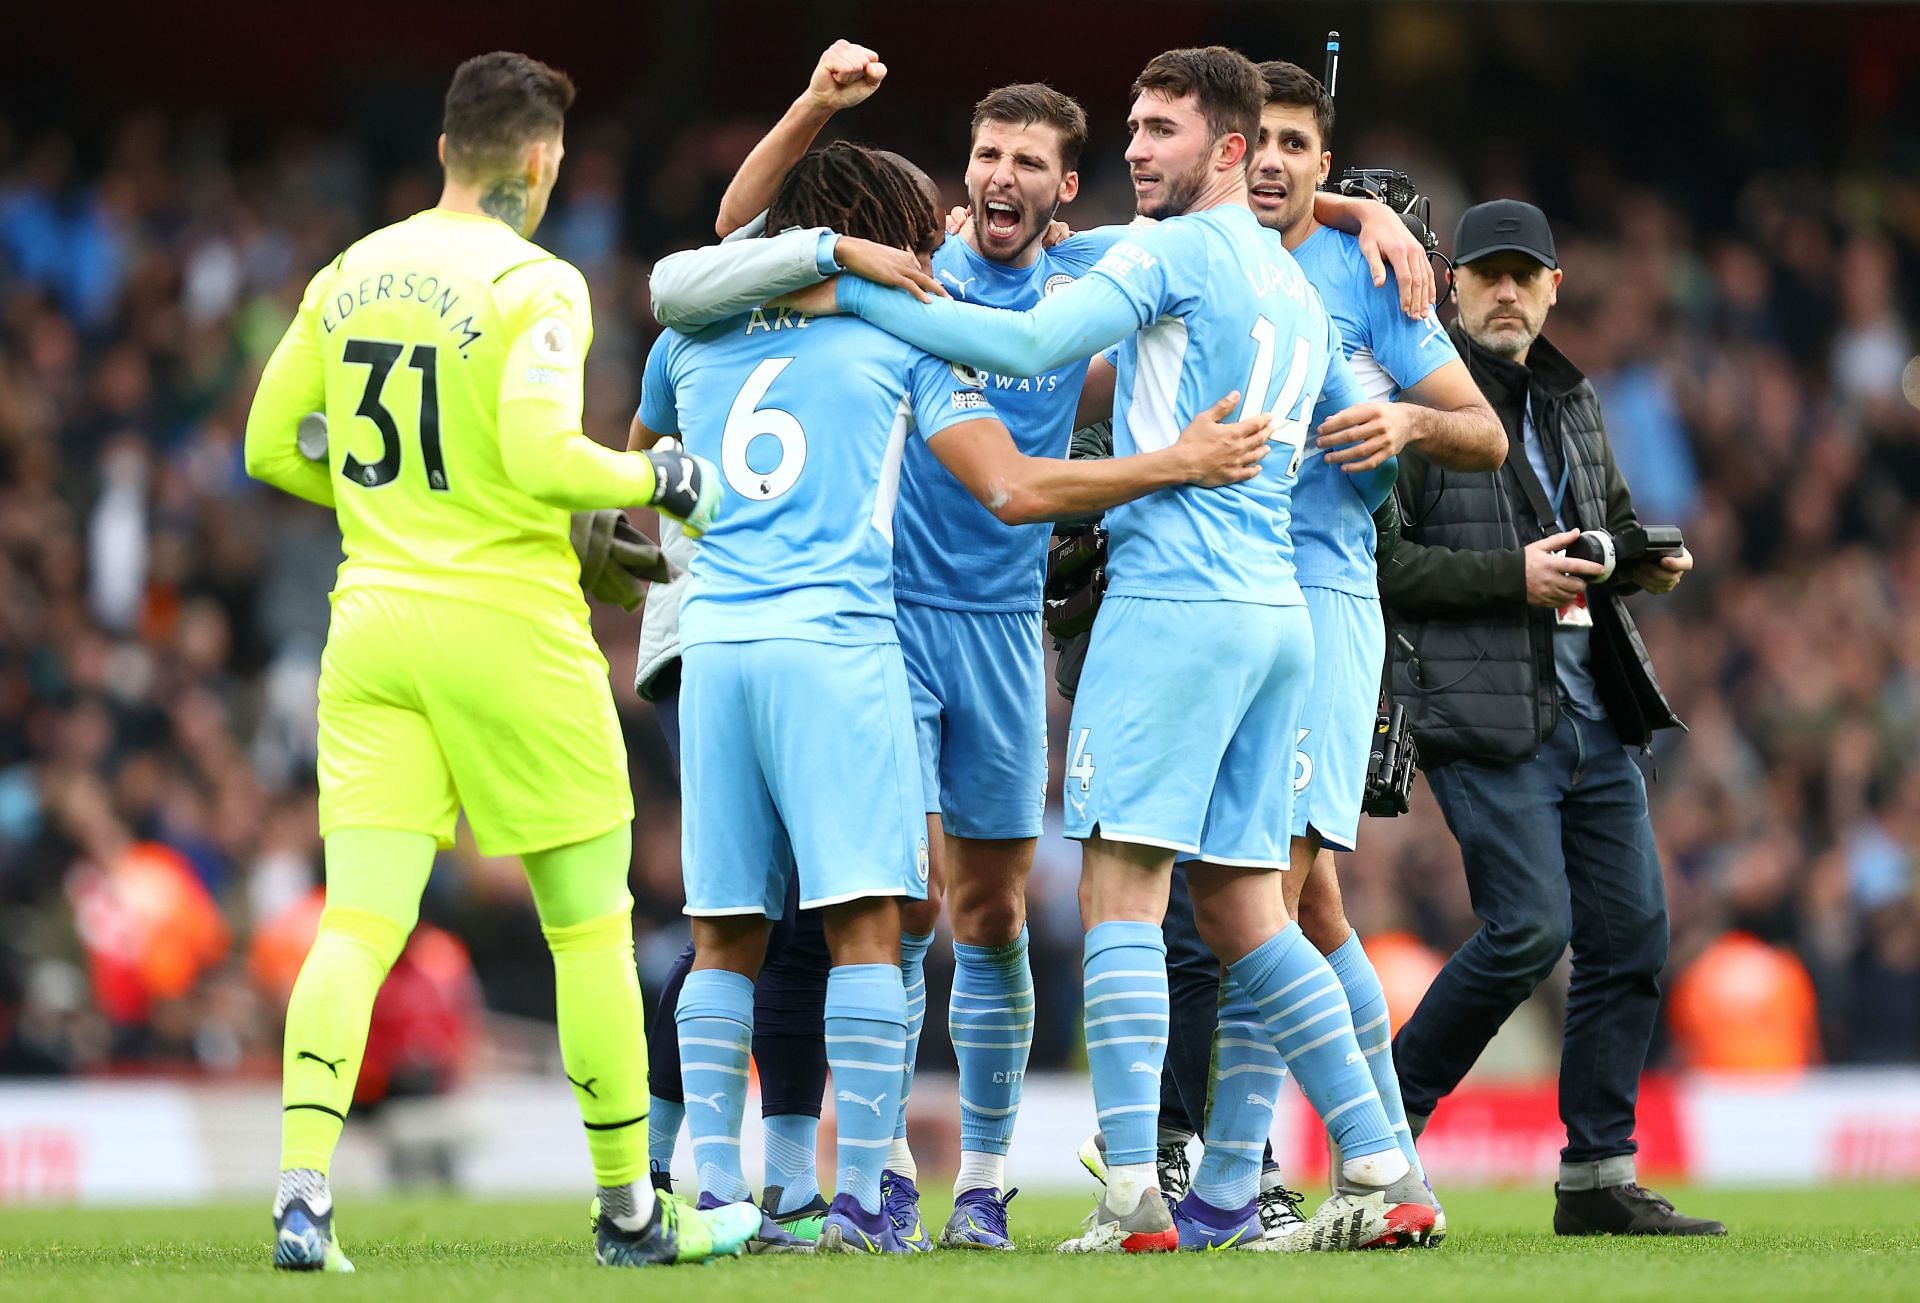 Manchester City has the tendency to go on long winning-streaks